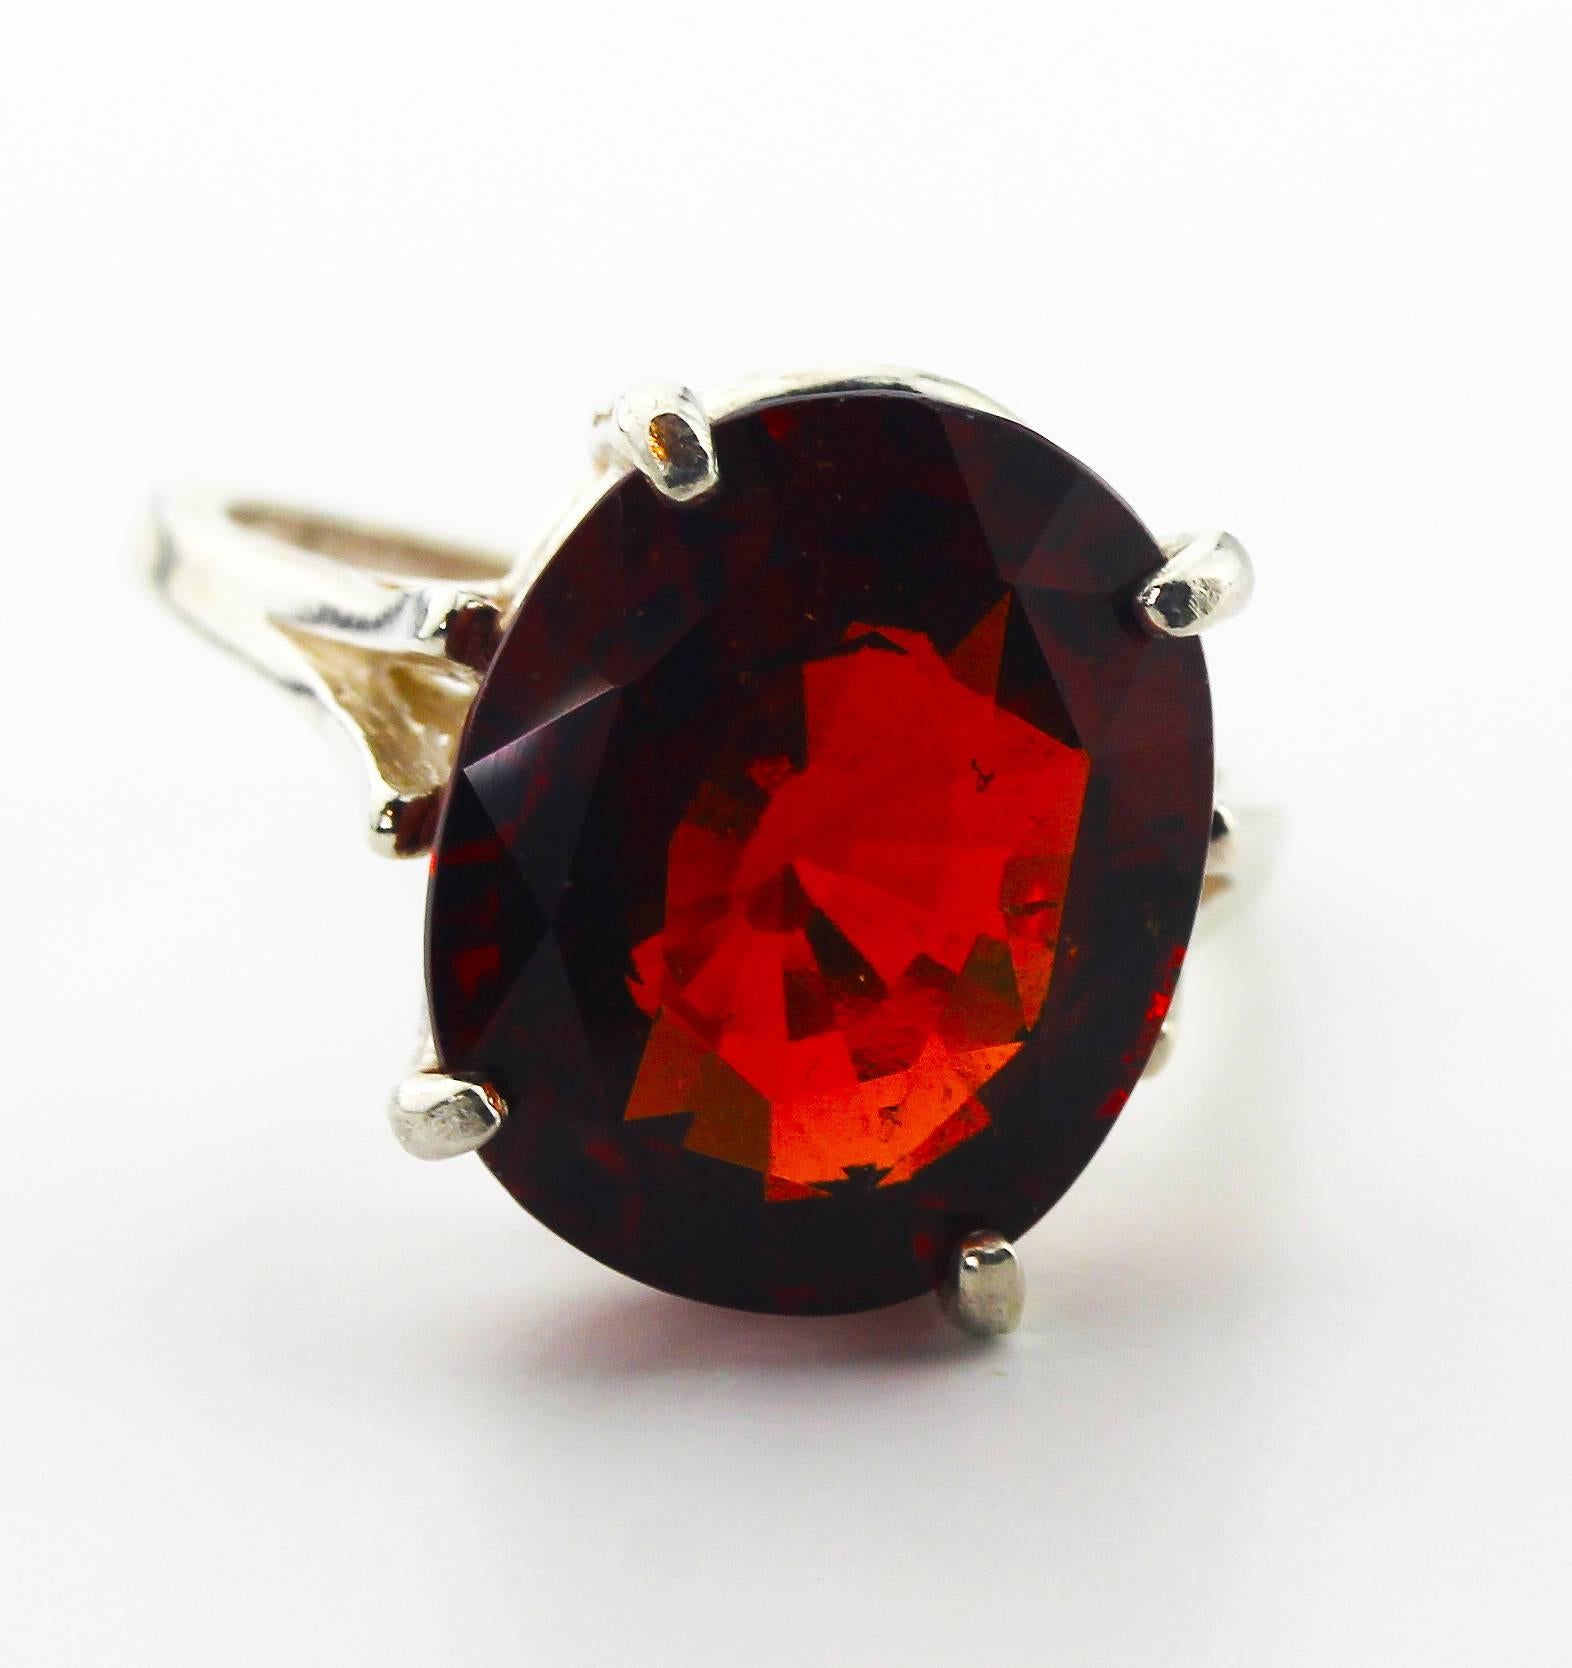 Brilliant rare red 10.75 Carat Hessonite Garnet set in a Sterling Silver ring.  The ring is a sizable 7.